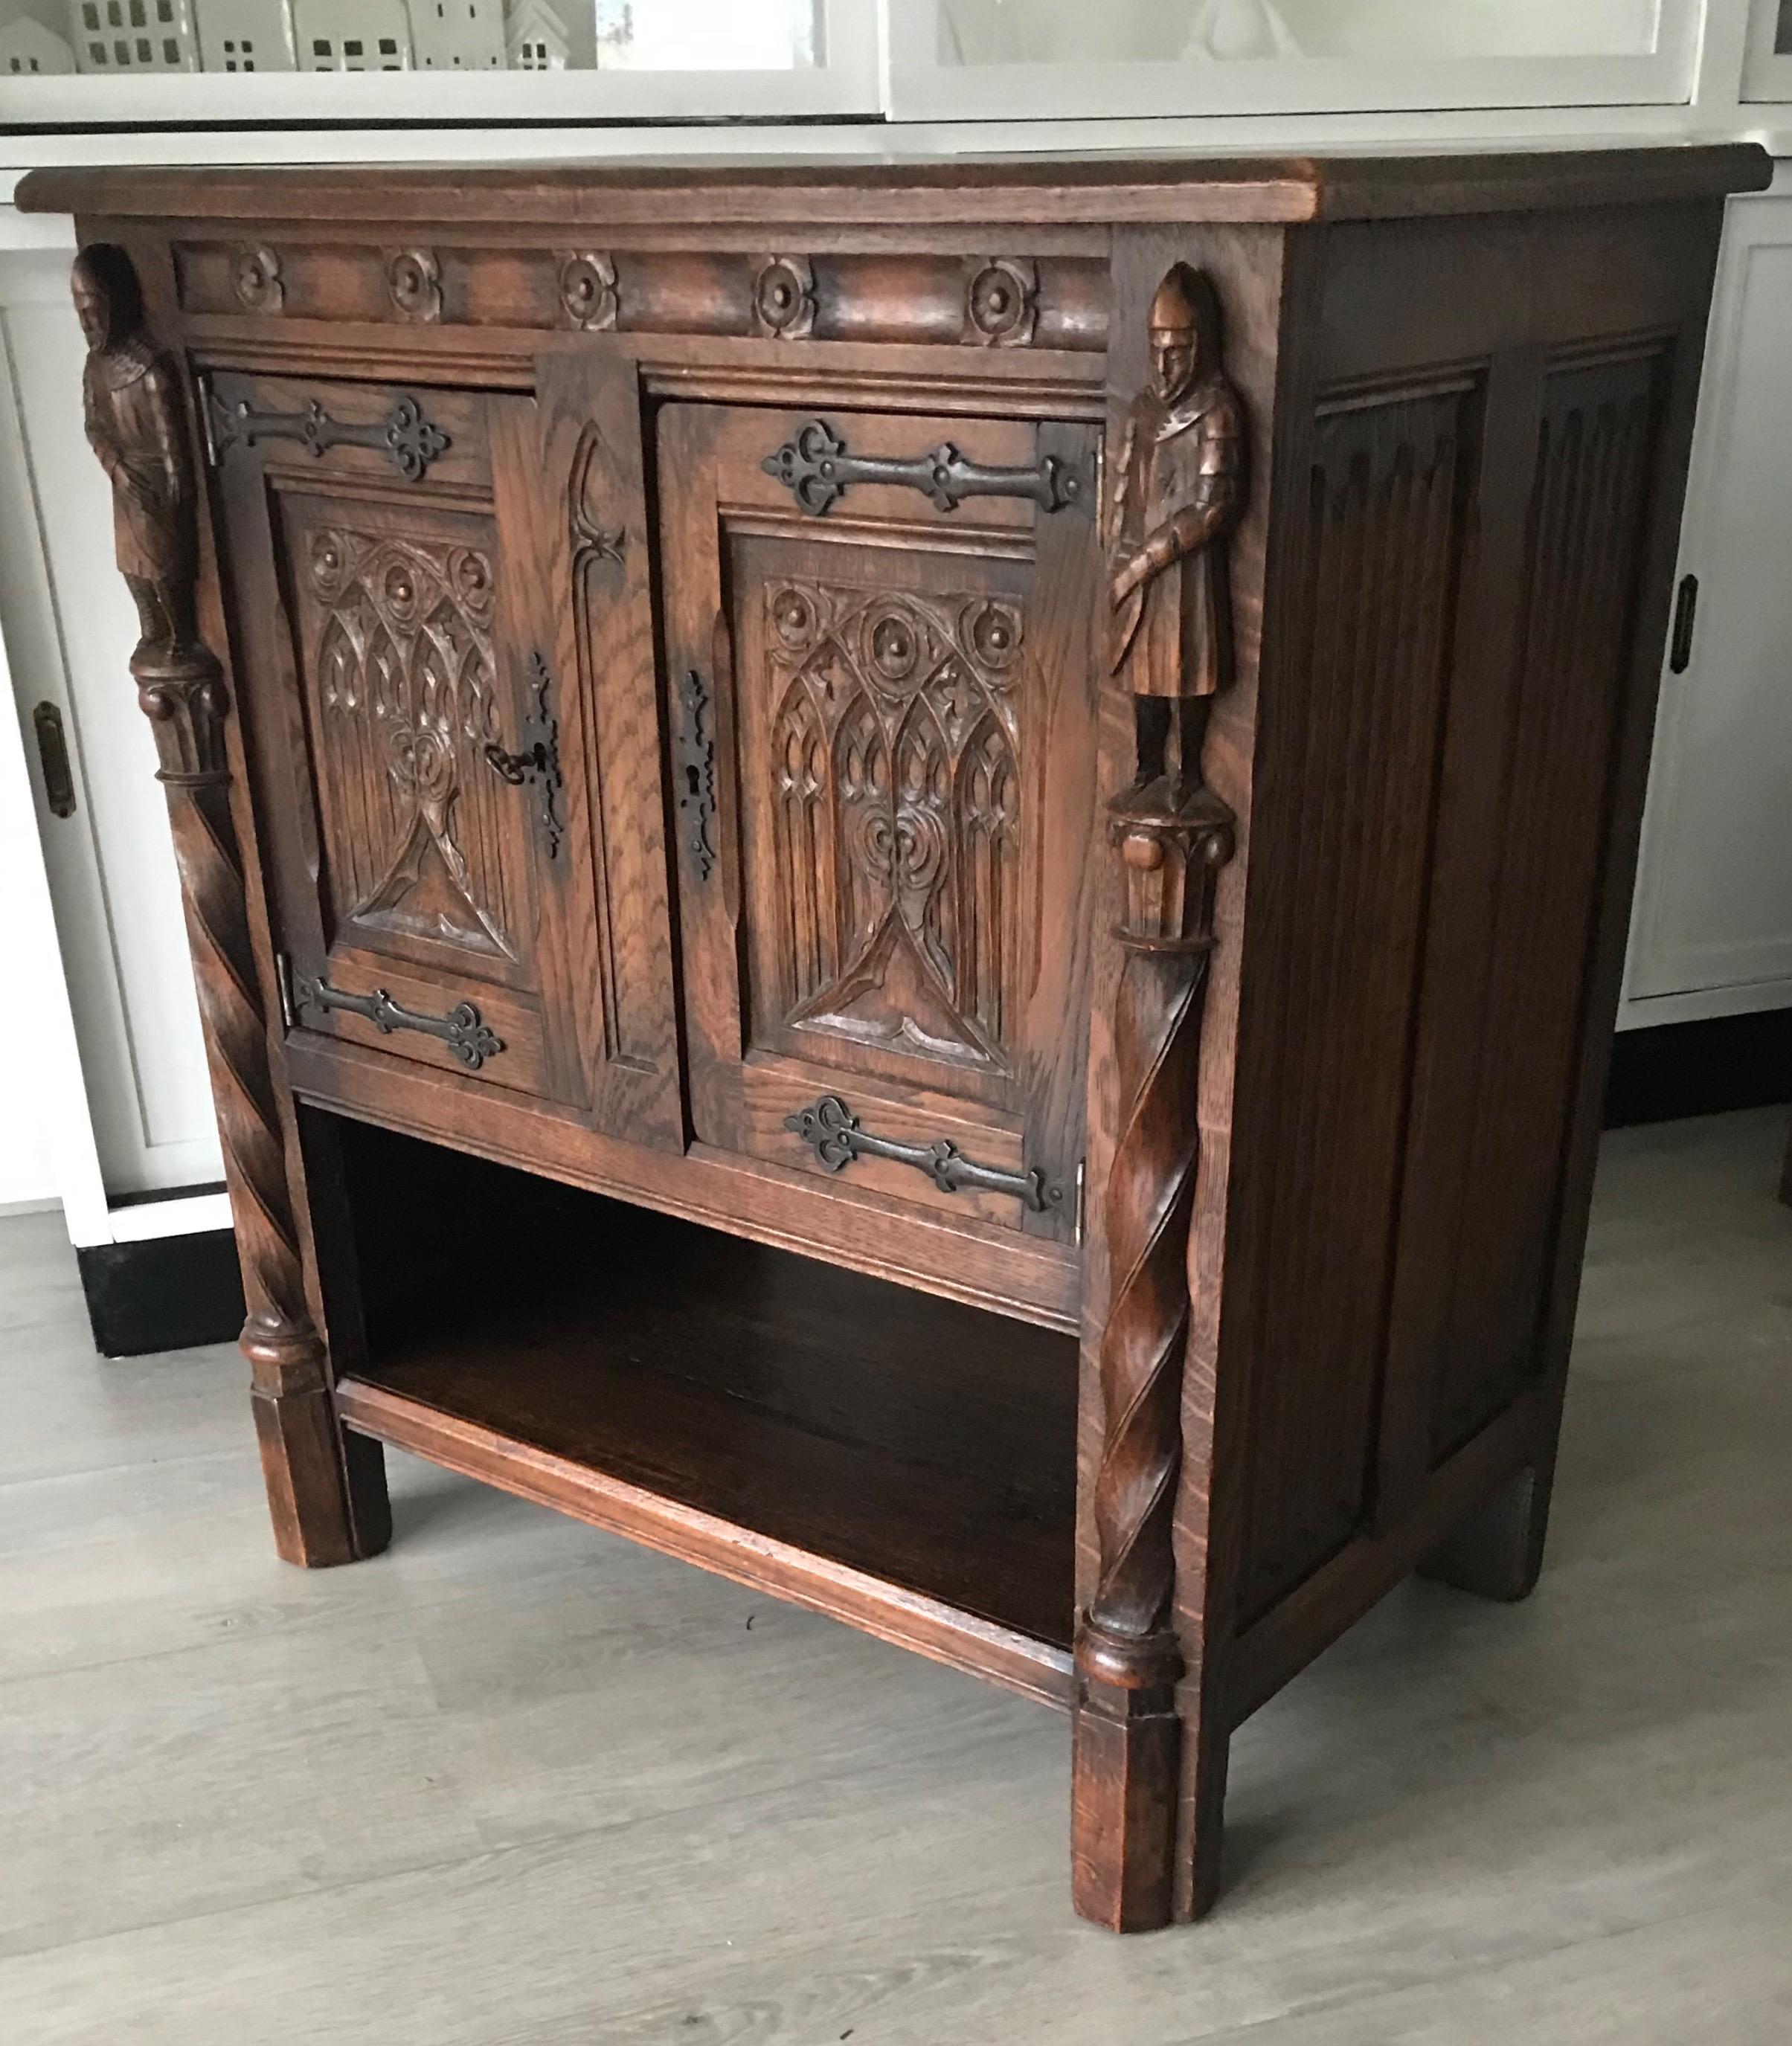 Marvellous and practical Gothic Revival drinks cabinet. 

This rare, Dutch Gothic dry bar is in excellent condition. This beautifully carved cabinet comes with two Knights who look like they are guards to the gate of a castle. The doors to this